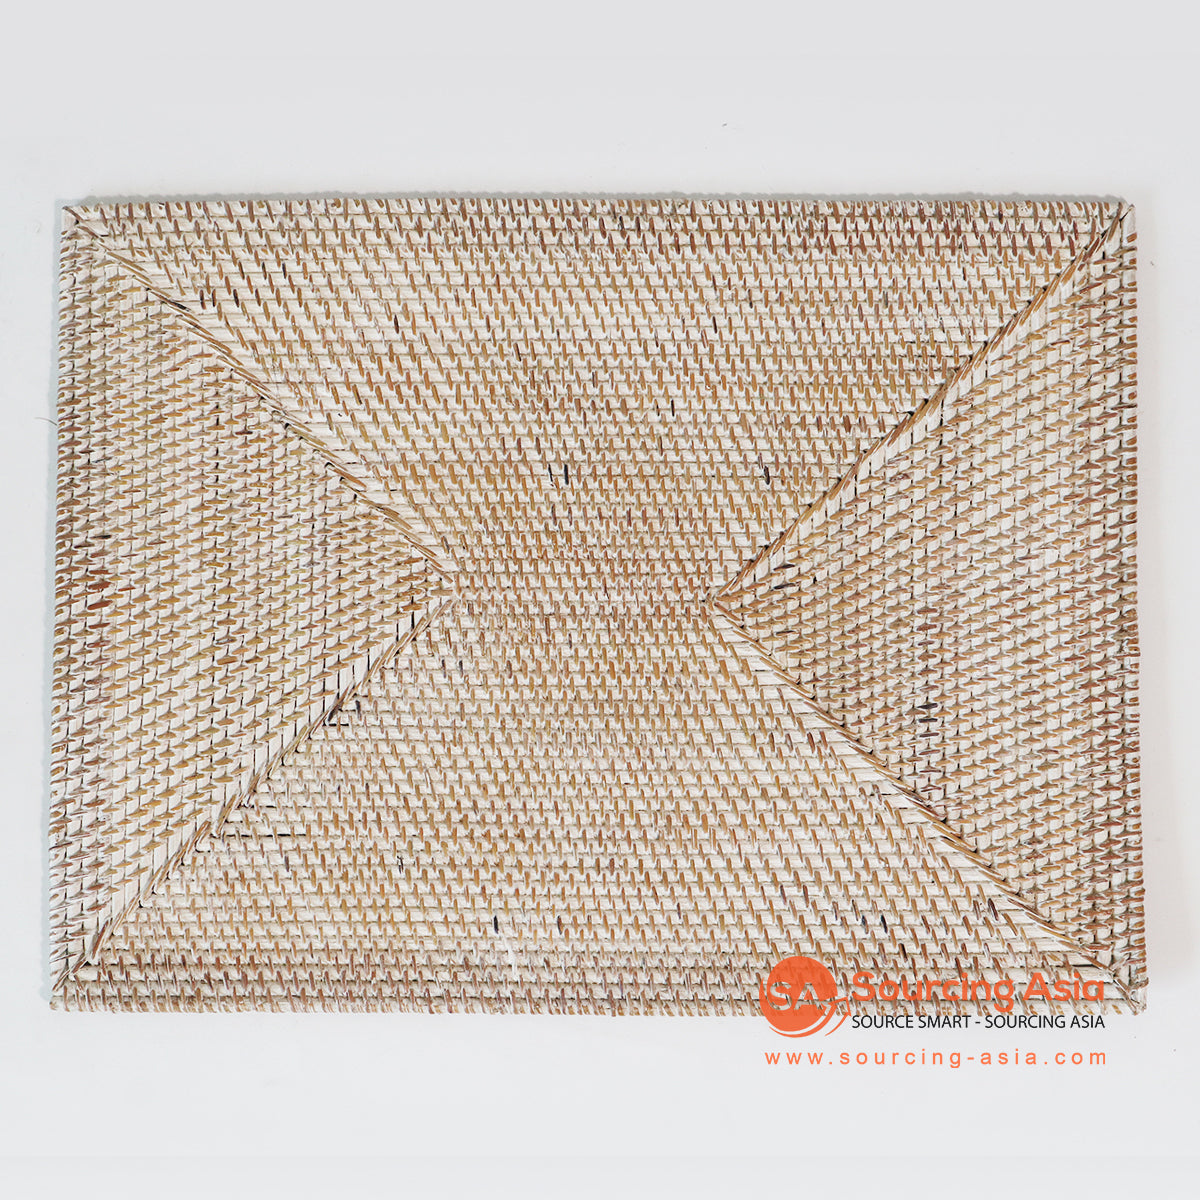 MTIC053-1 WHITE WASH WOVEN RATTAN PLACEMAT